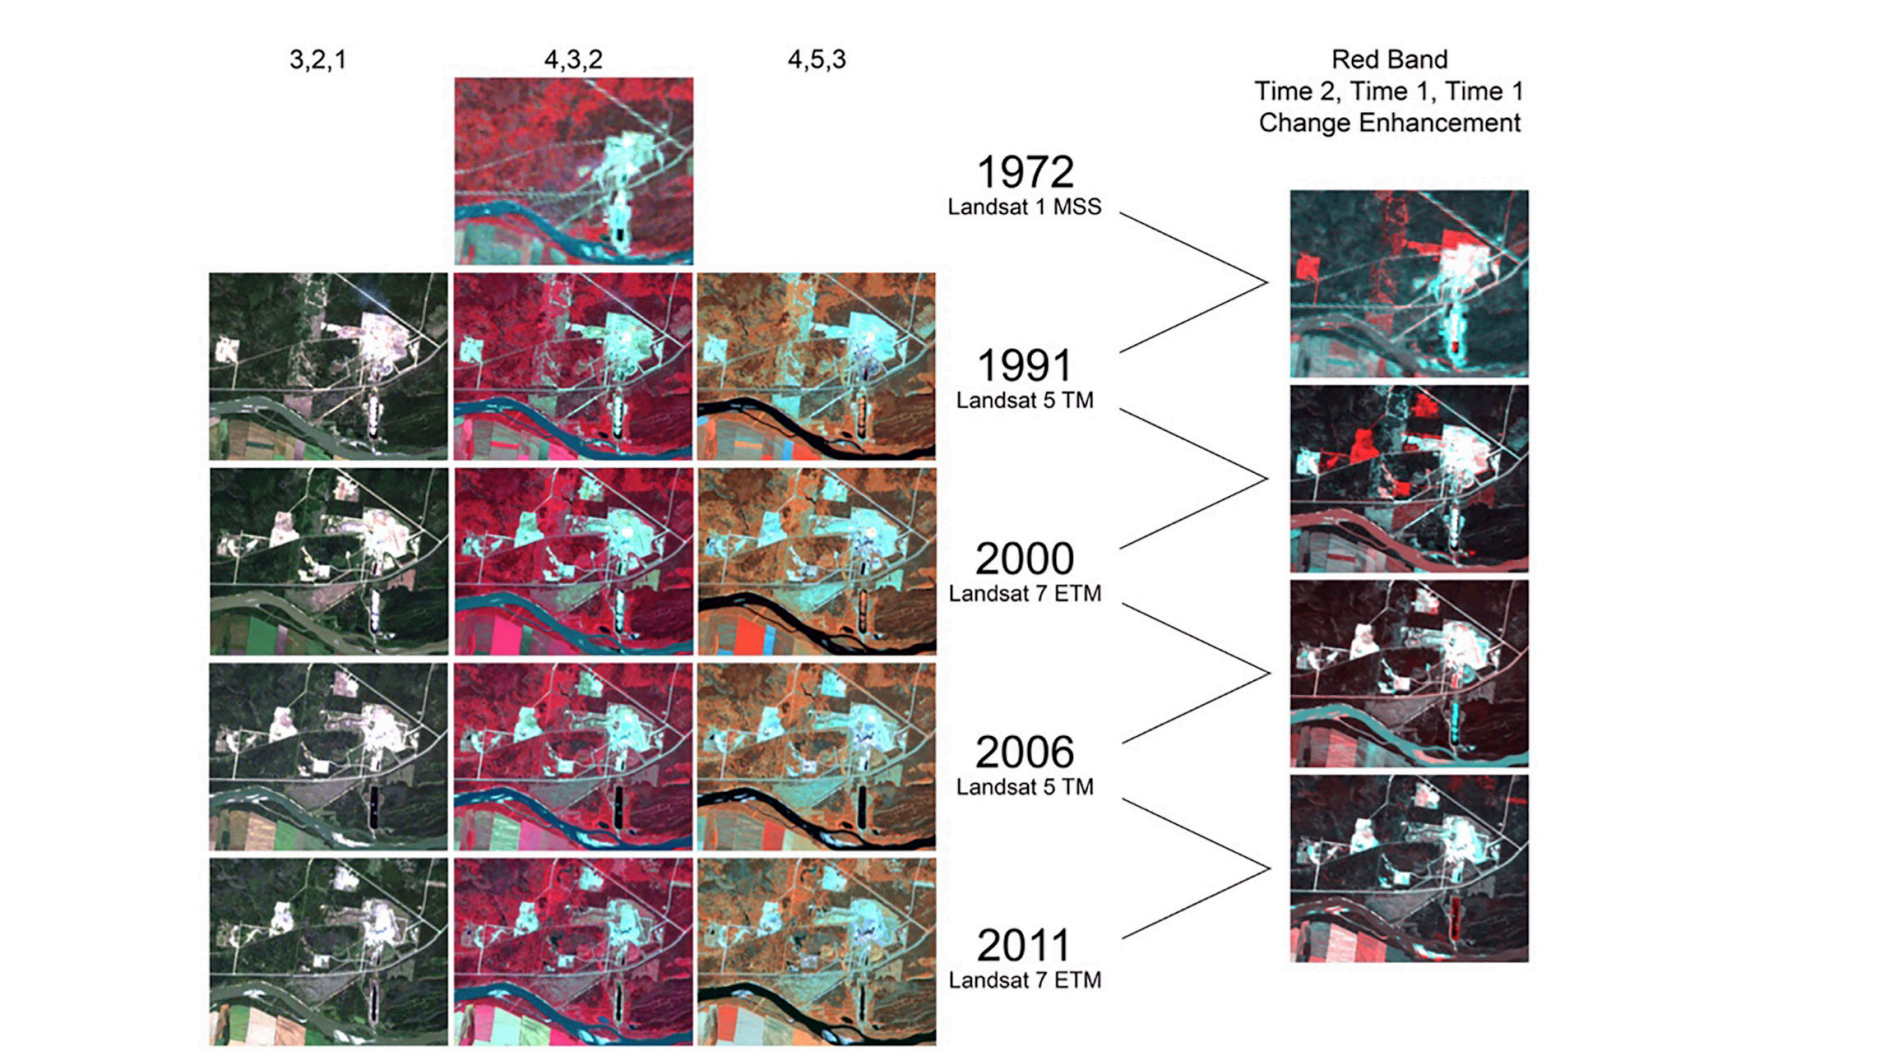 Examples of various Landsat satellite band combinations and change enhancements that may be used in the mapping process. Note the change enhancement at right shows red triggers where vegetation loss or change has occurred. Band combinations shown are normal colour rendition on left, with colour infrared in the middle. The right-hand column shows Landsat Thematic Mapper (TM) and Enhanced Thematic Mapper (ETM) bands 4,5,3 (i.e., the two near infrared bands and a red band) displayed as red, green, blue, source: [Dyk et al. 2015](https://cfs.nrcan.gc.ca/pubwarehouse/pdfs/36042.pdf)